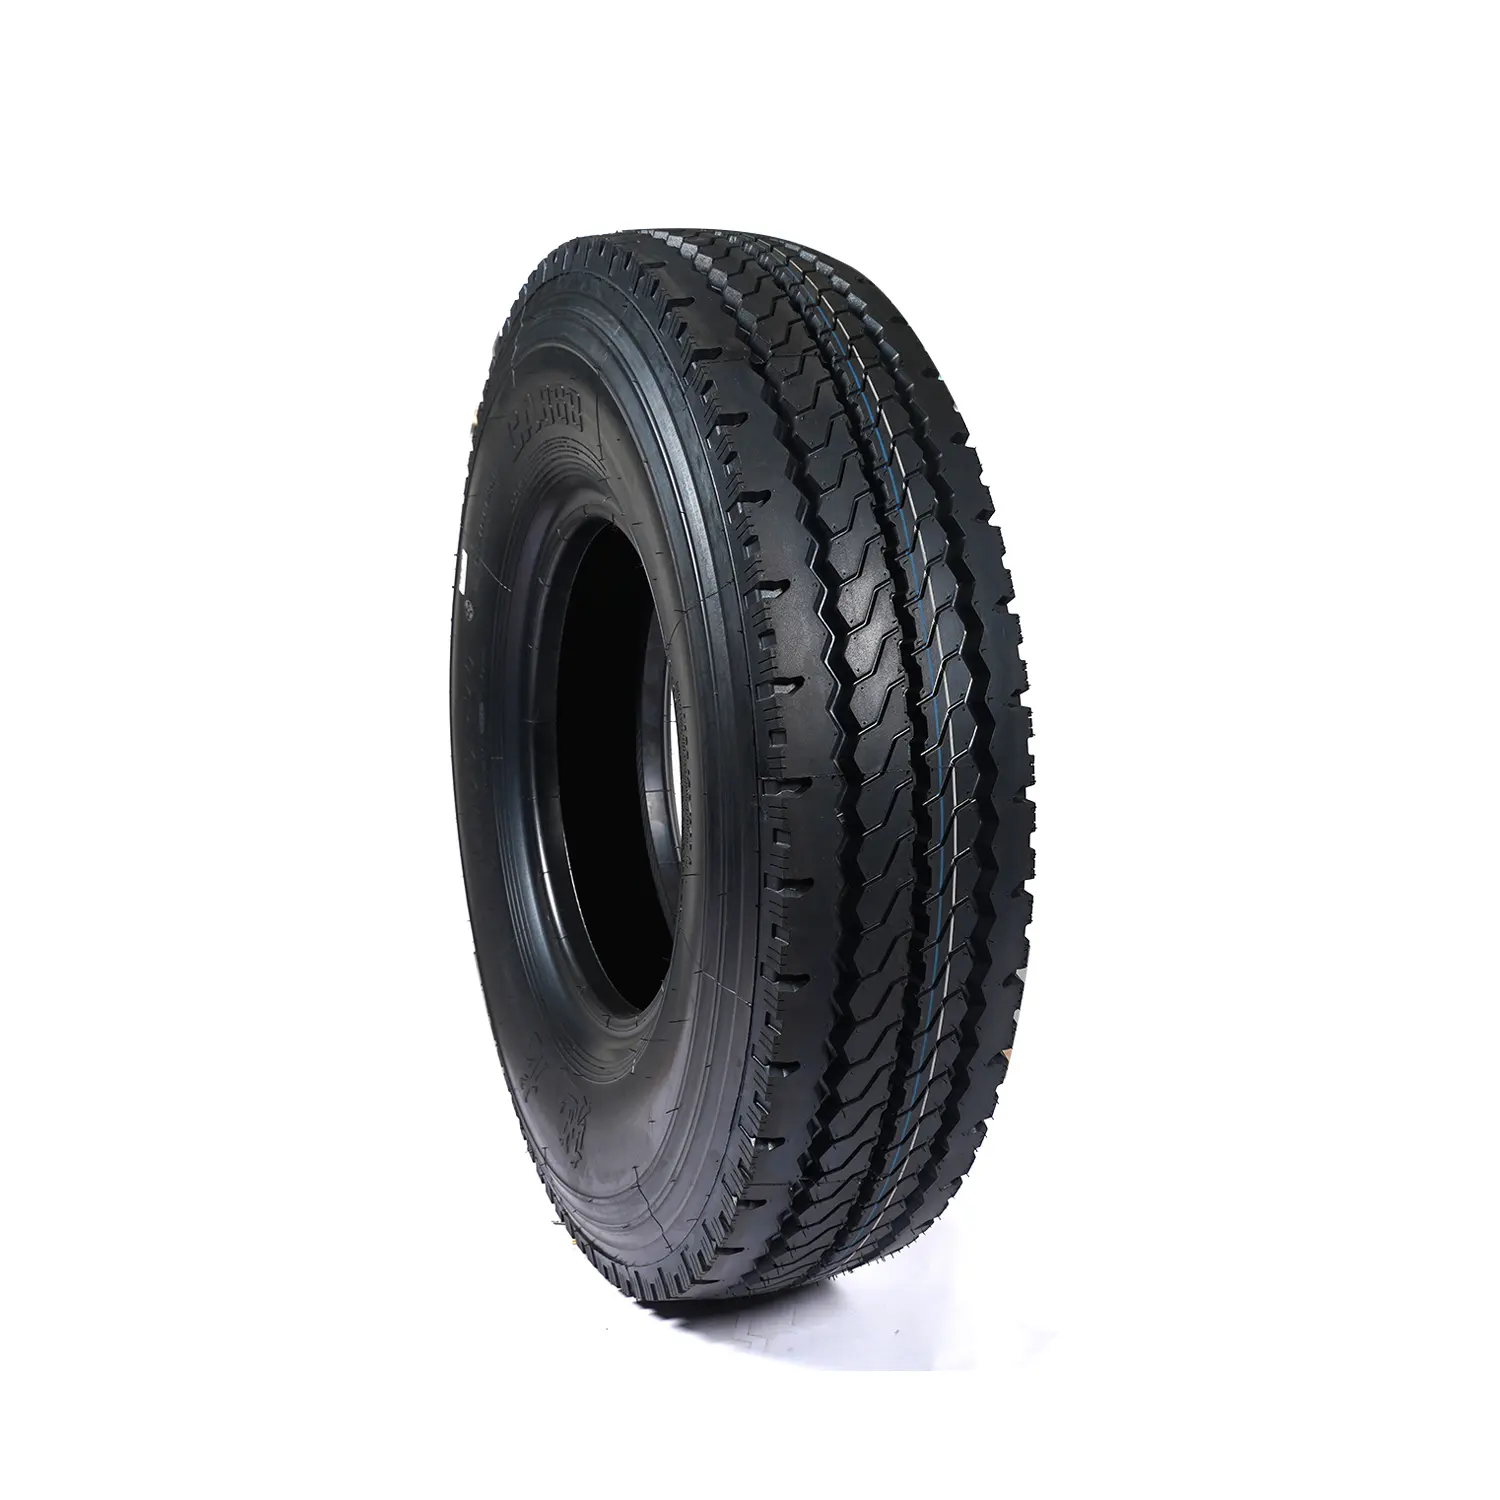 Tire Waste Recycled Rubber Scrap Scrap Scrap Supplier Used truck tires and wheels